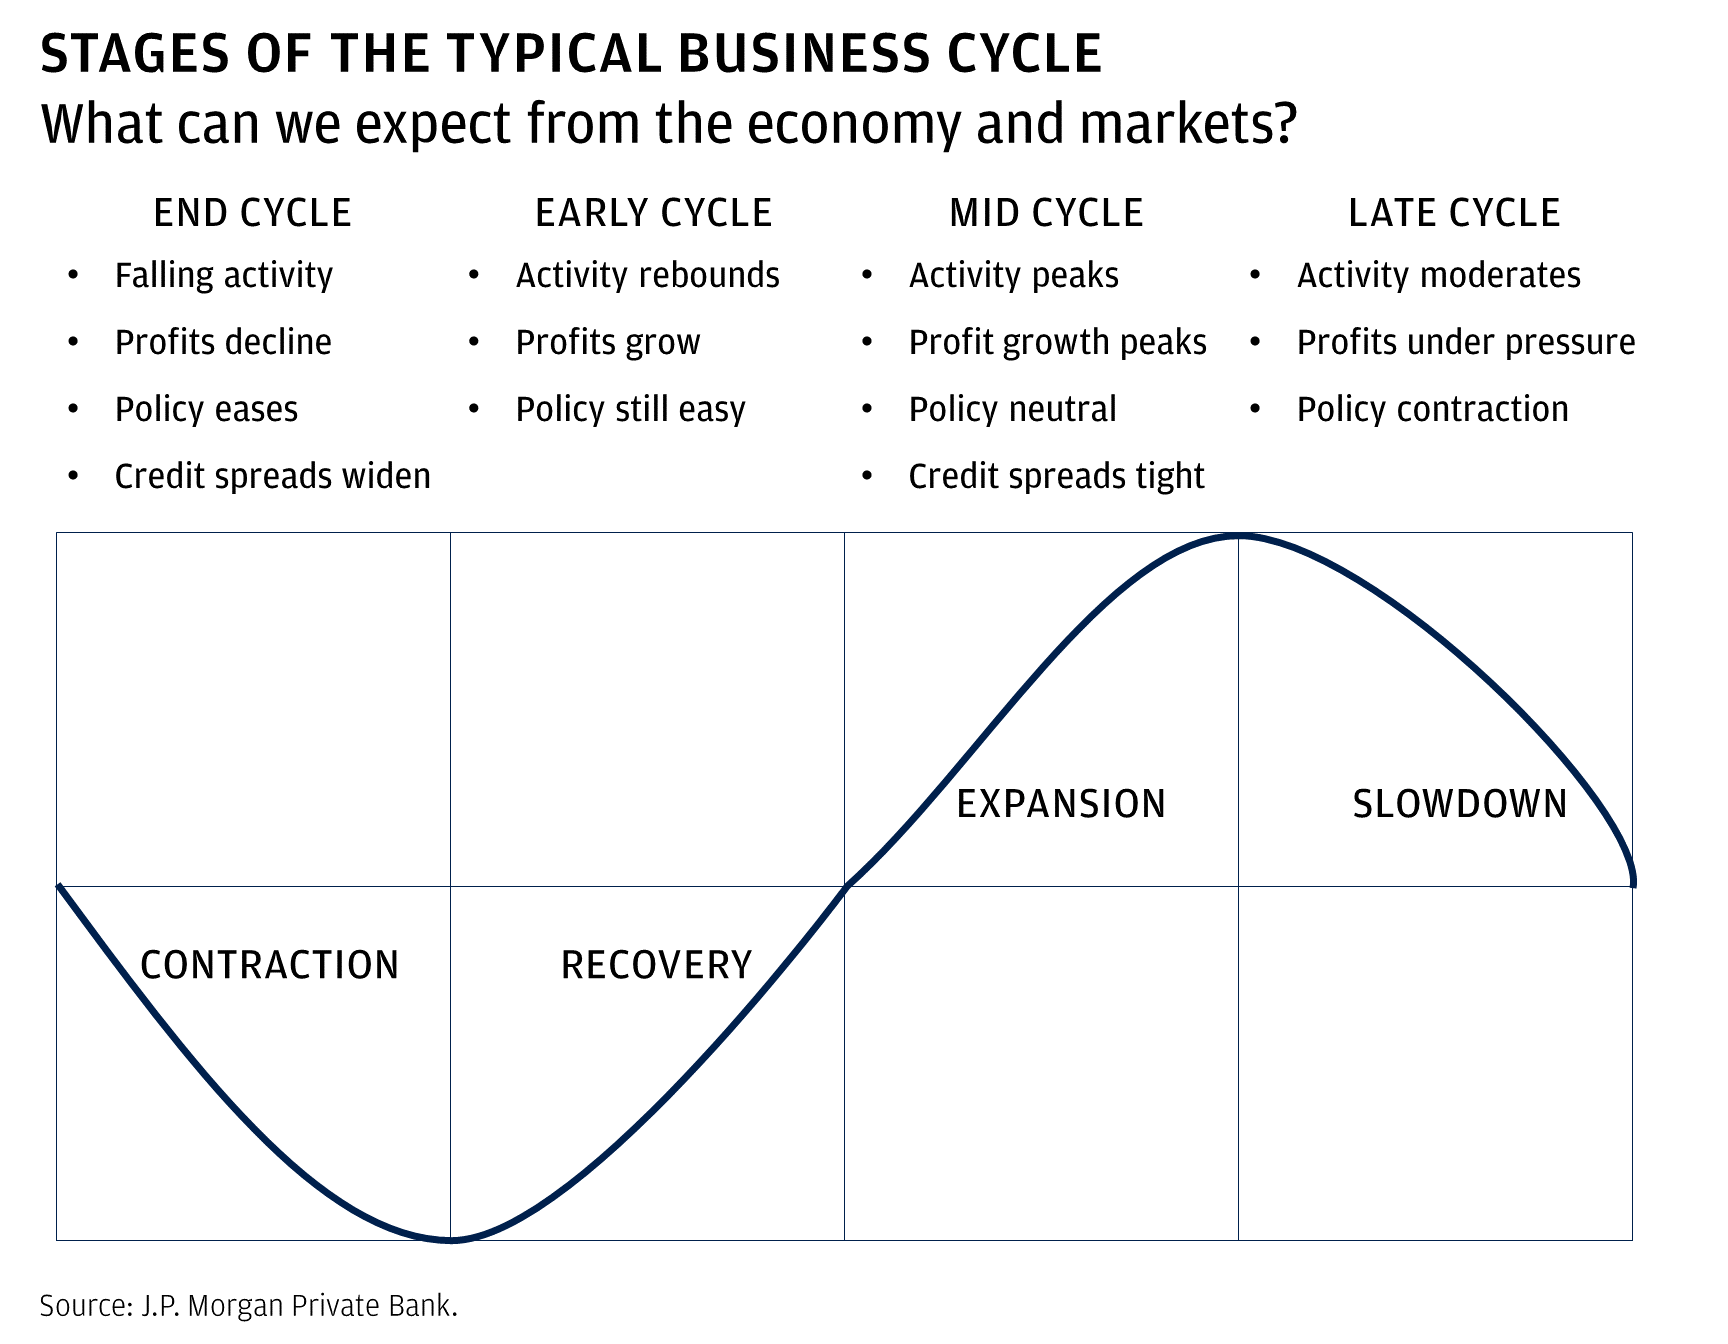 This chart shows the typical stages of a business cycle and the financial conditions that we expect to observe in each. The cycle starts with end cycle, where the economy tends to contract before rebounding during early cycle as easy policy support activity and higher profits. After this, activity and profit growth tend to peak in mid cycle as the economy is in expansion mode, before ending with a slowdown in late cycle.